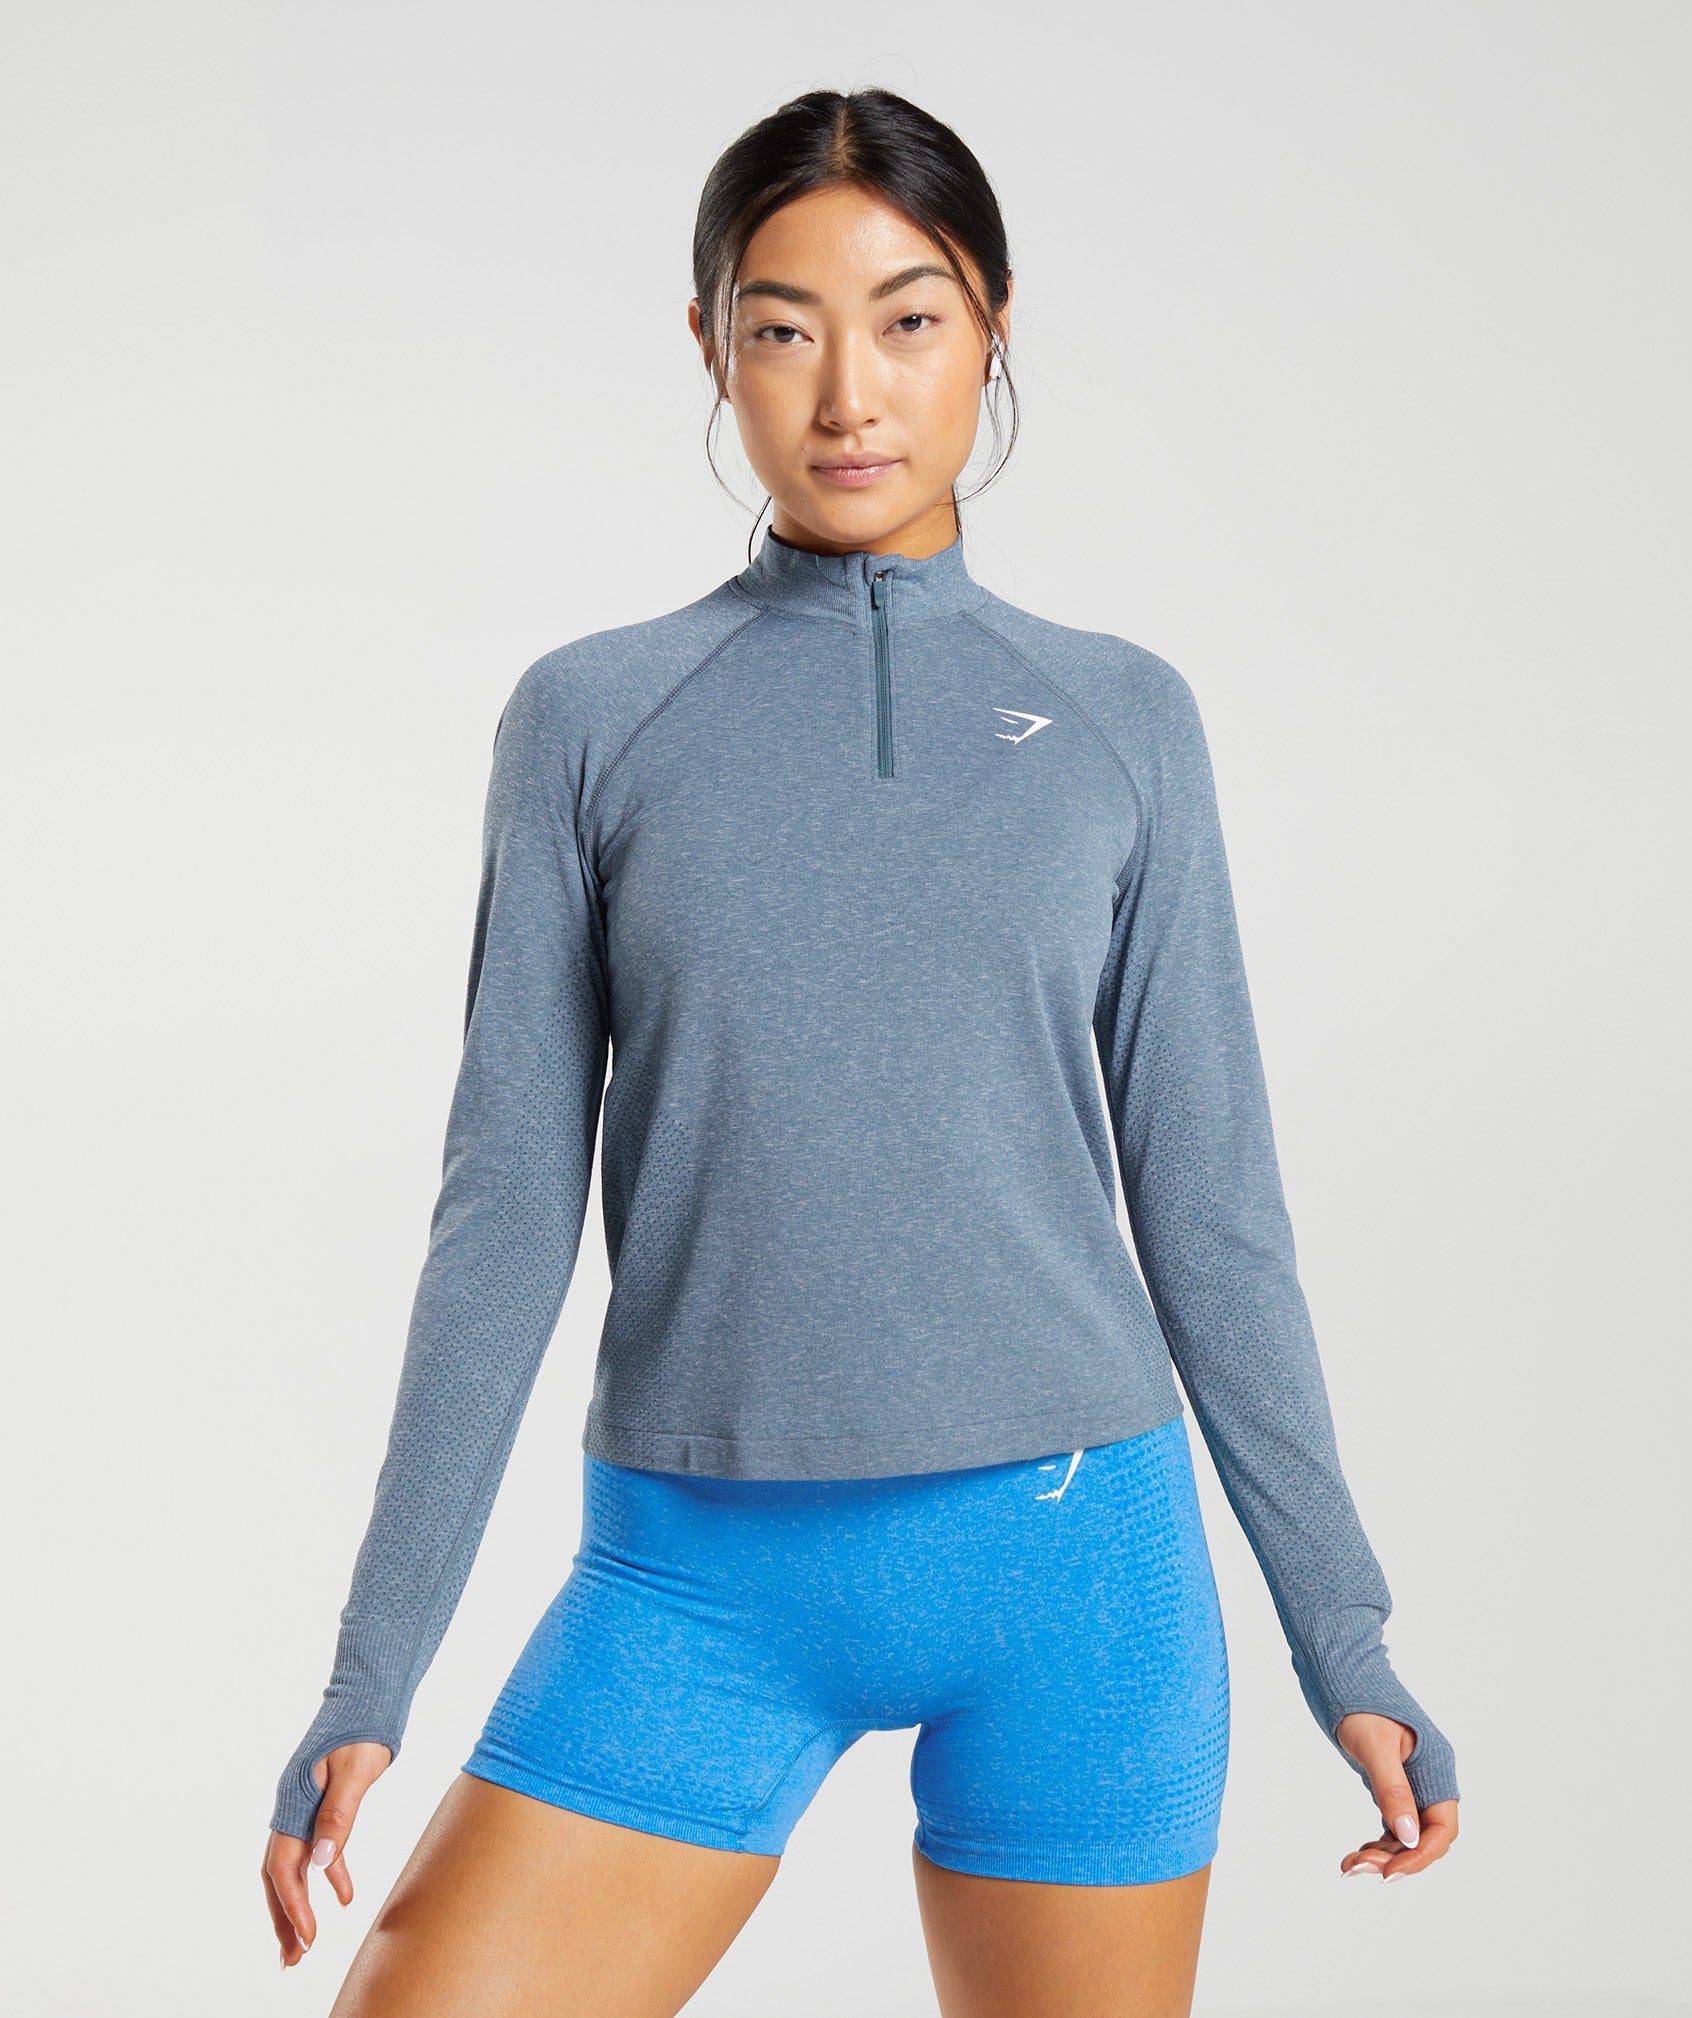 Vital Seamless 2.0 1/4 Track Top in Evening Blue Marl - view 1